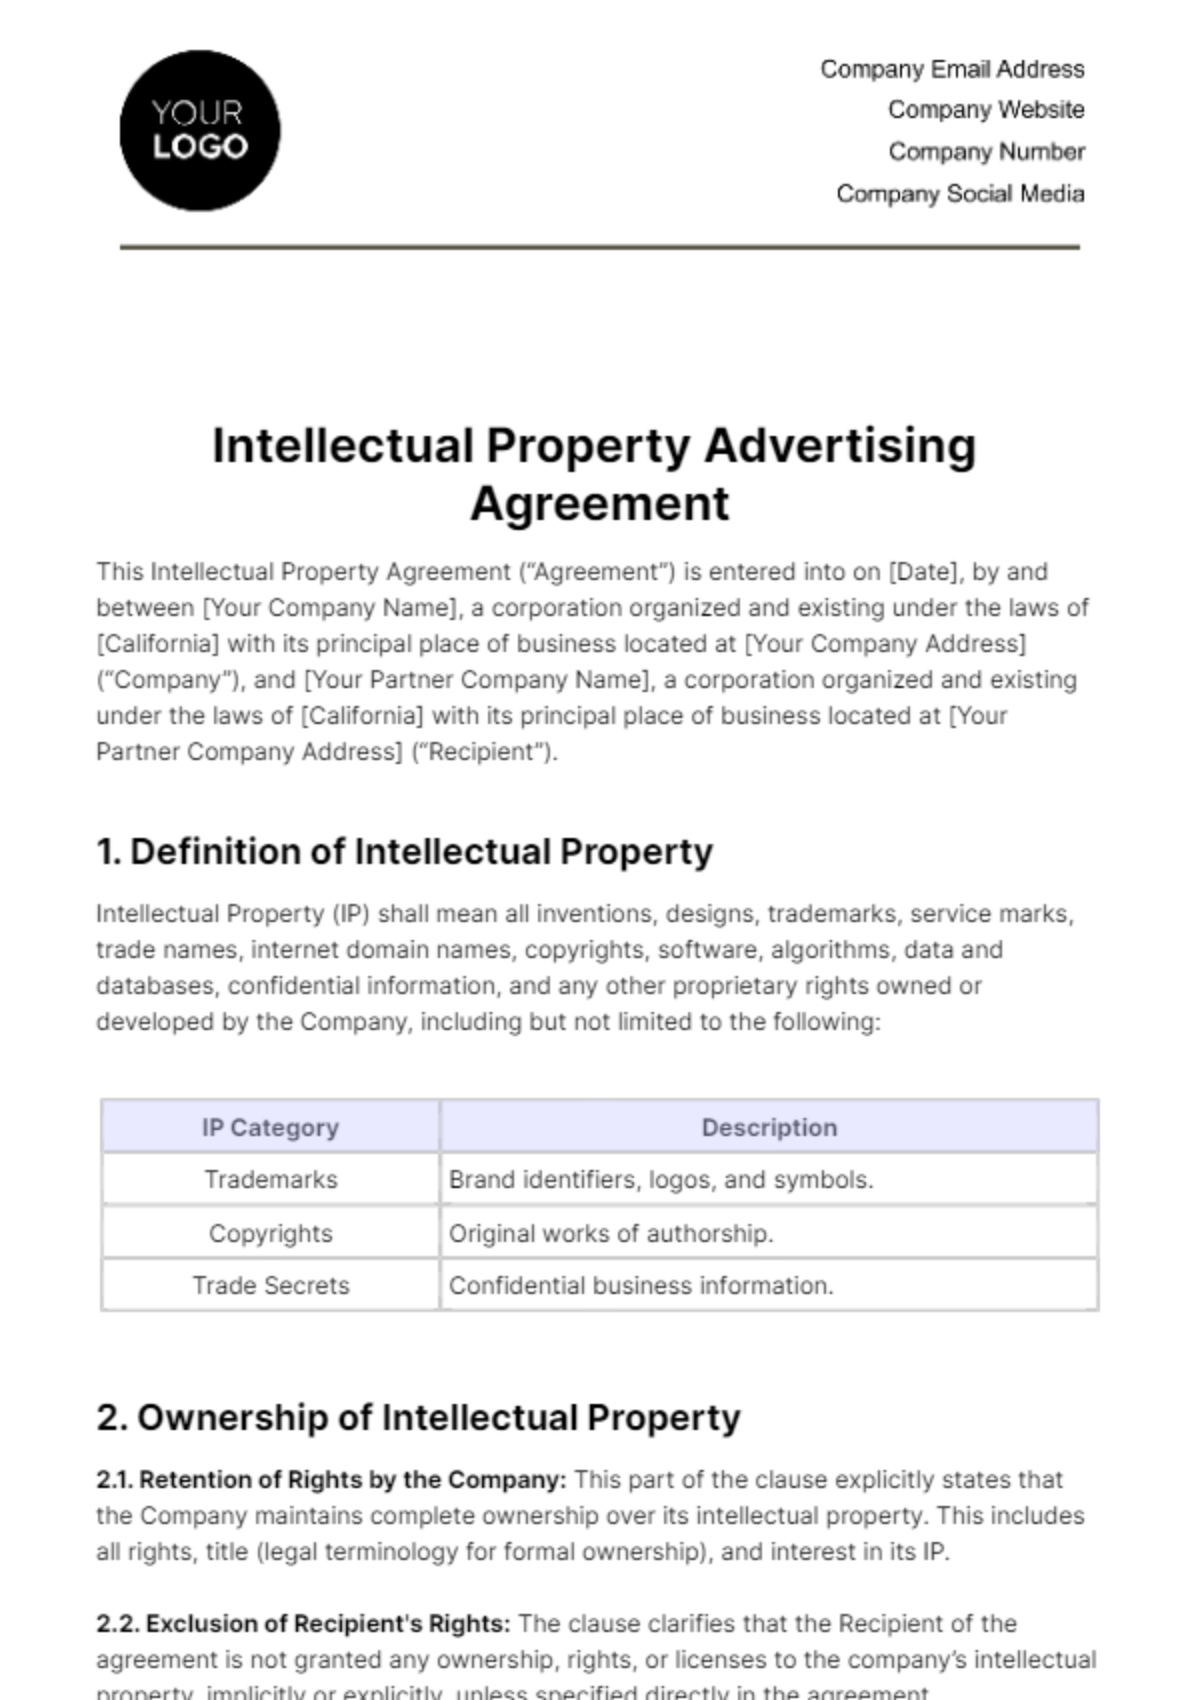 Intellectual Property Advertising Agreement Template